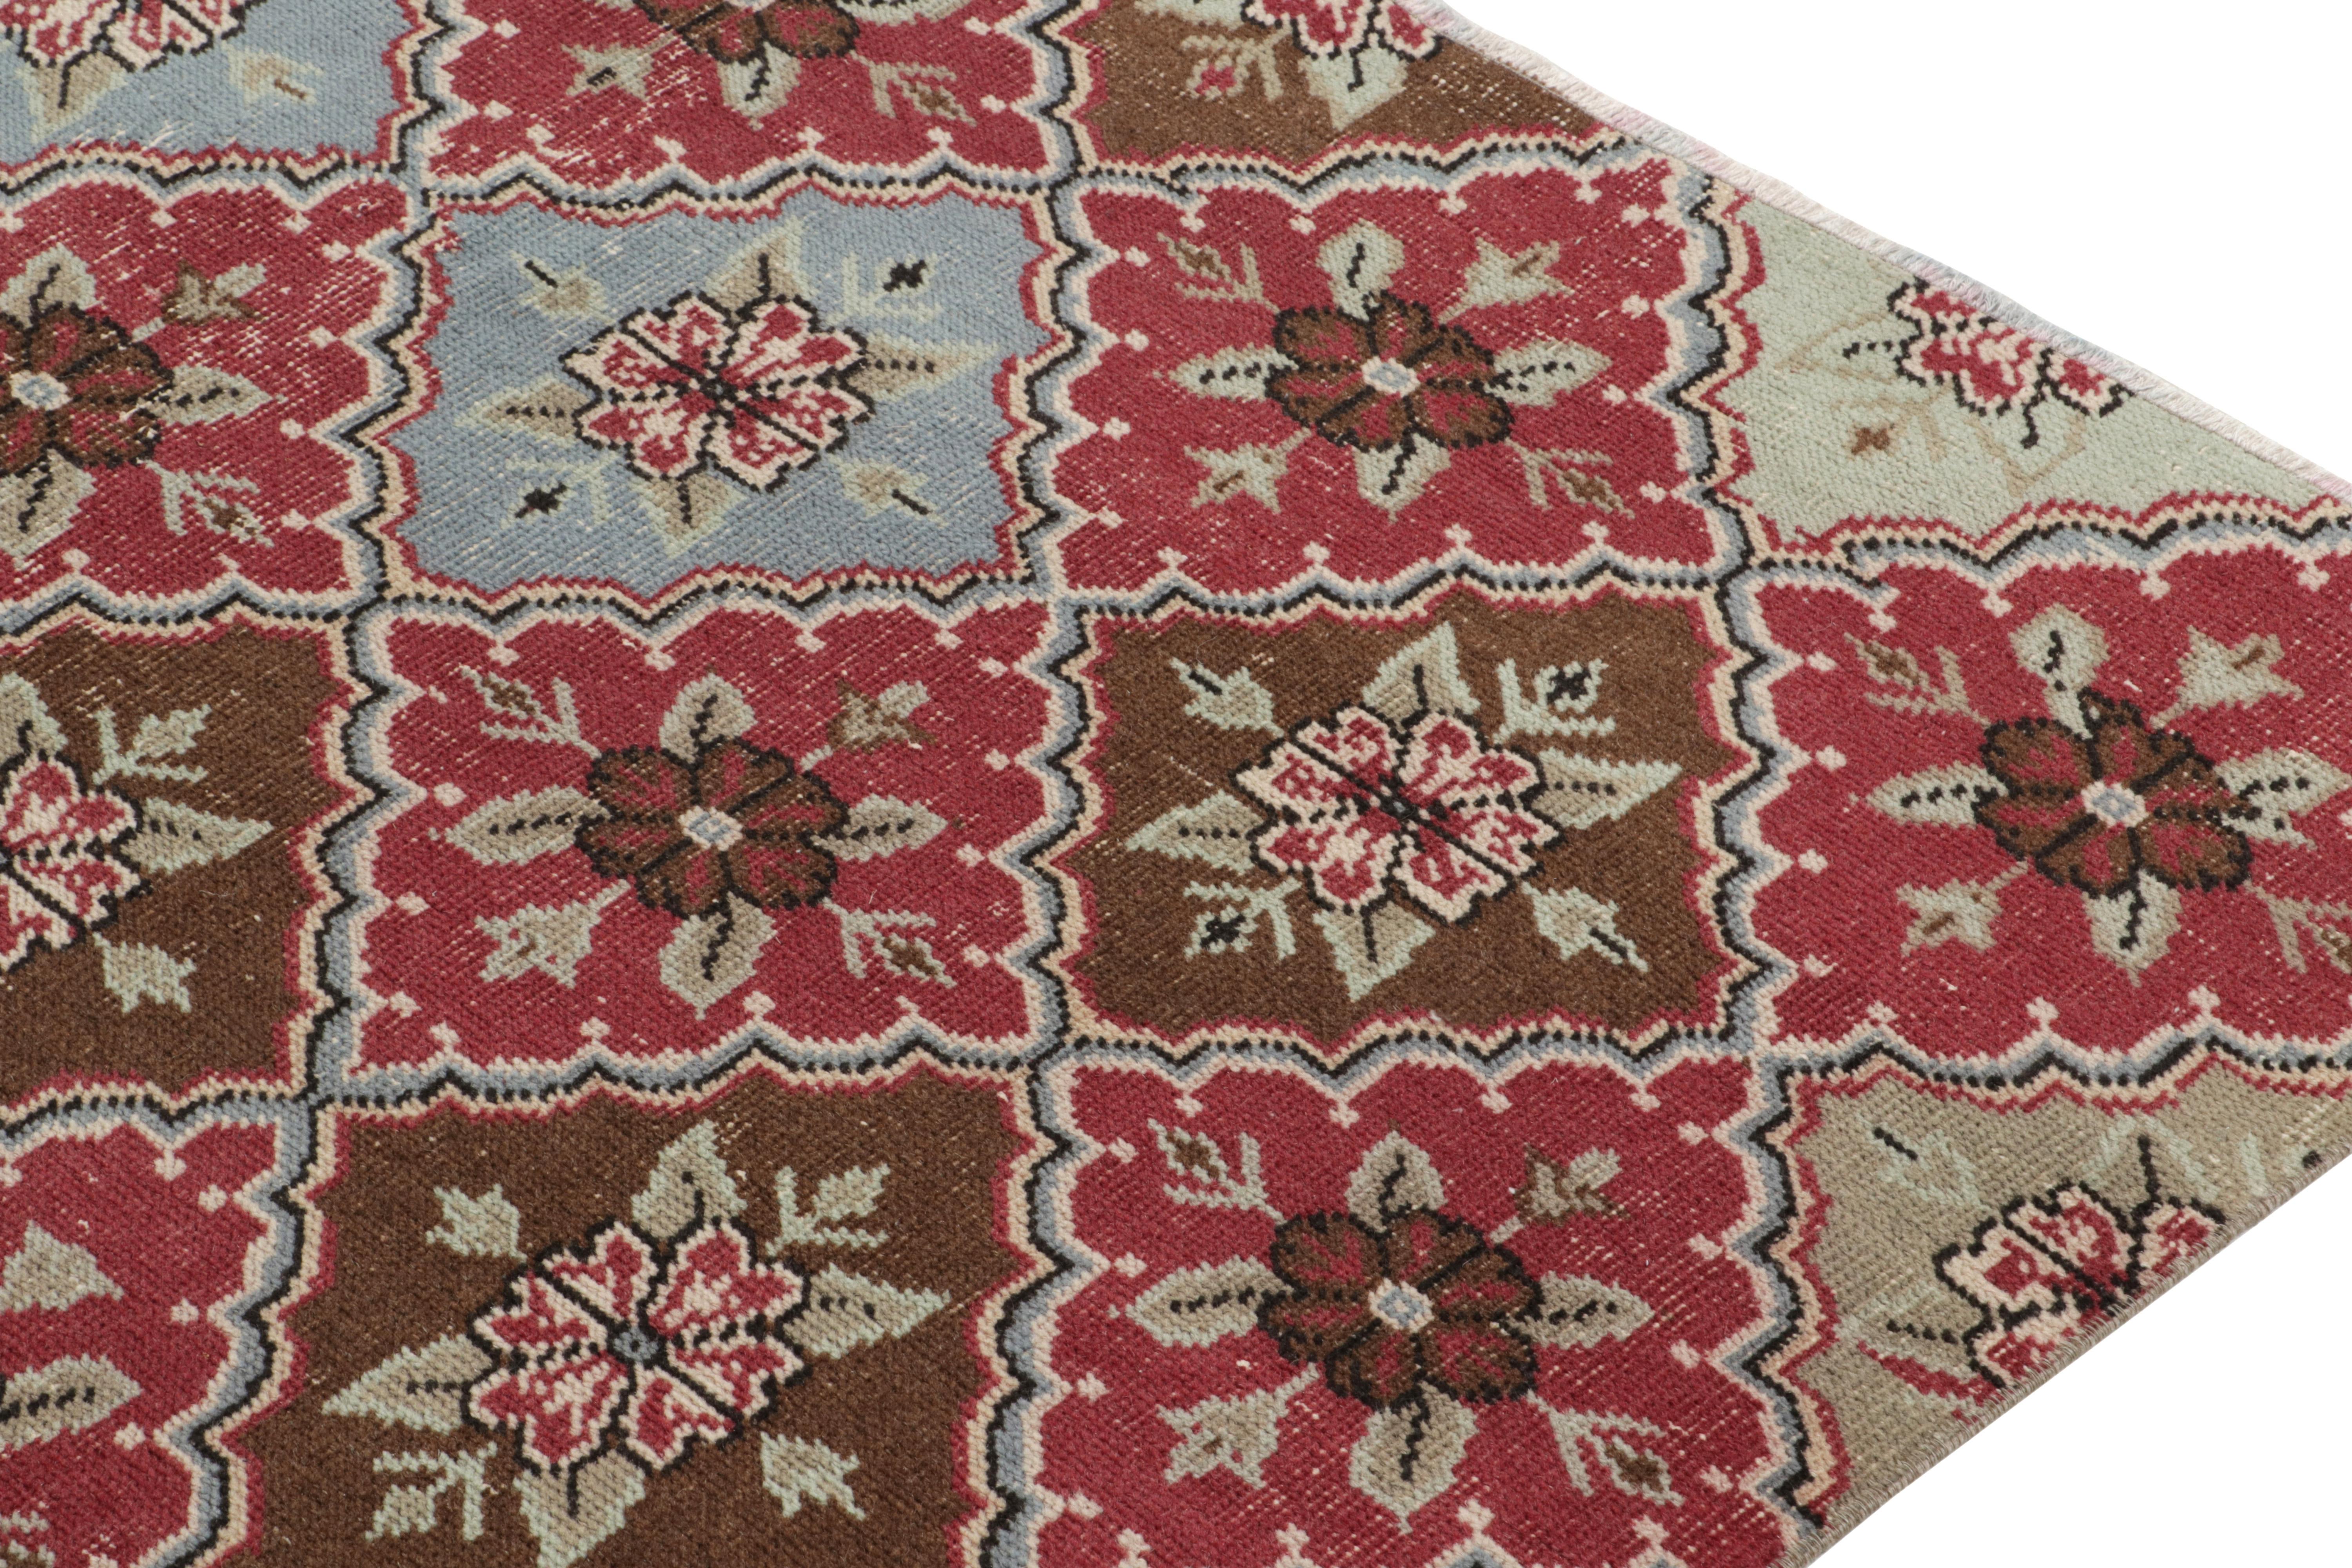 Hand-Knotted 1960s Vintage Deco Rug in Red, Beige-Brown Floral Trellis Pattern by Rug & Kilim For Sale